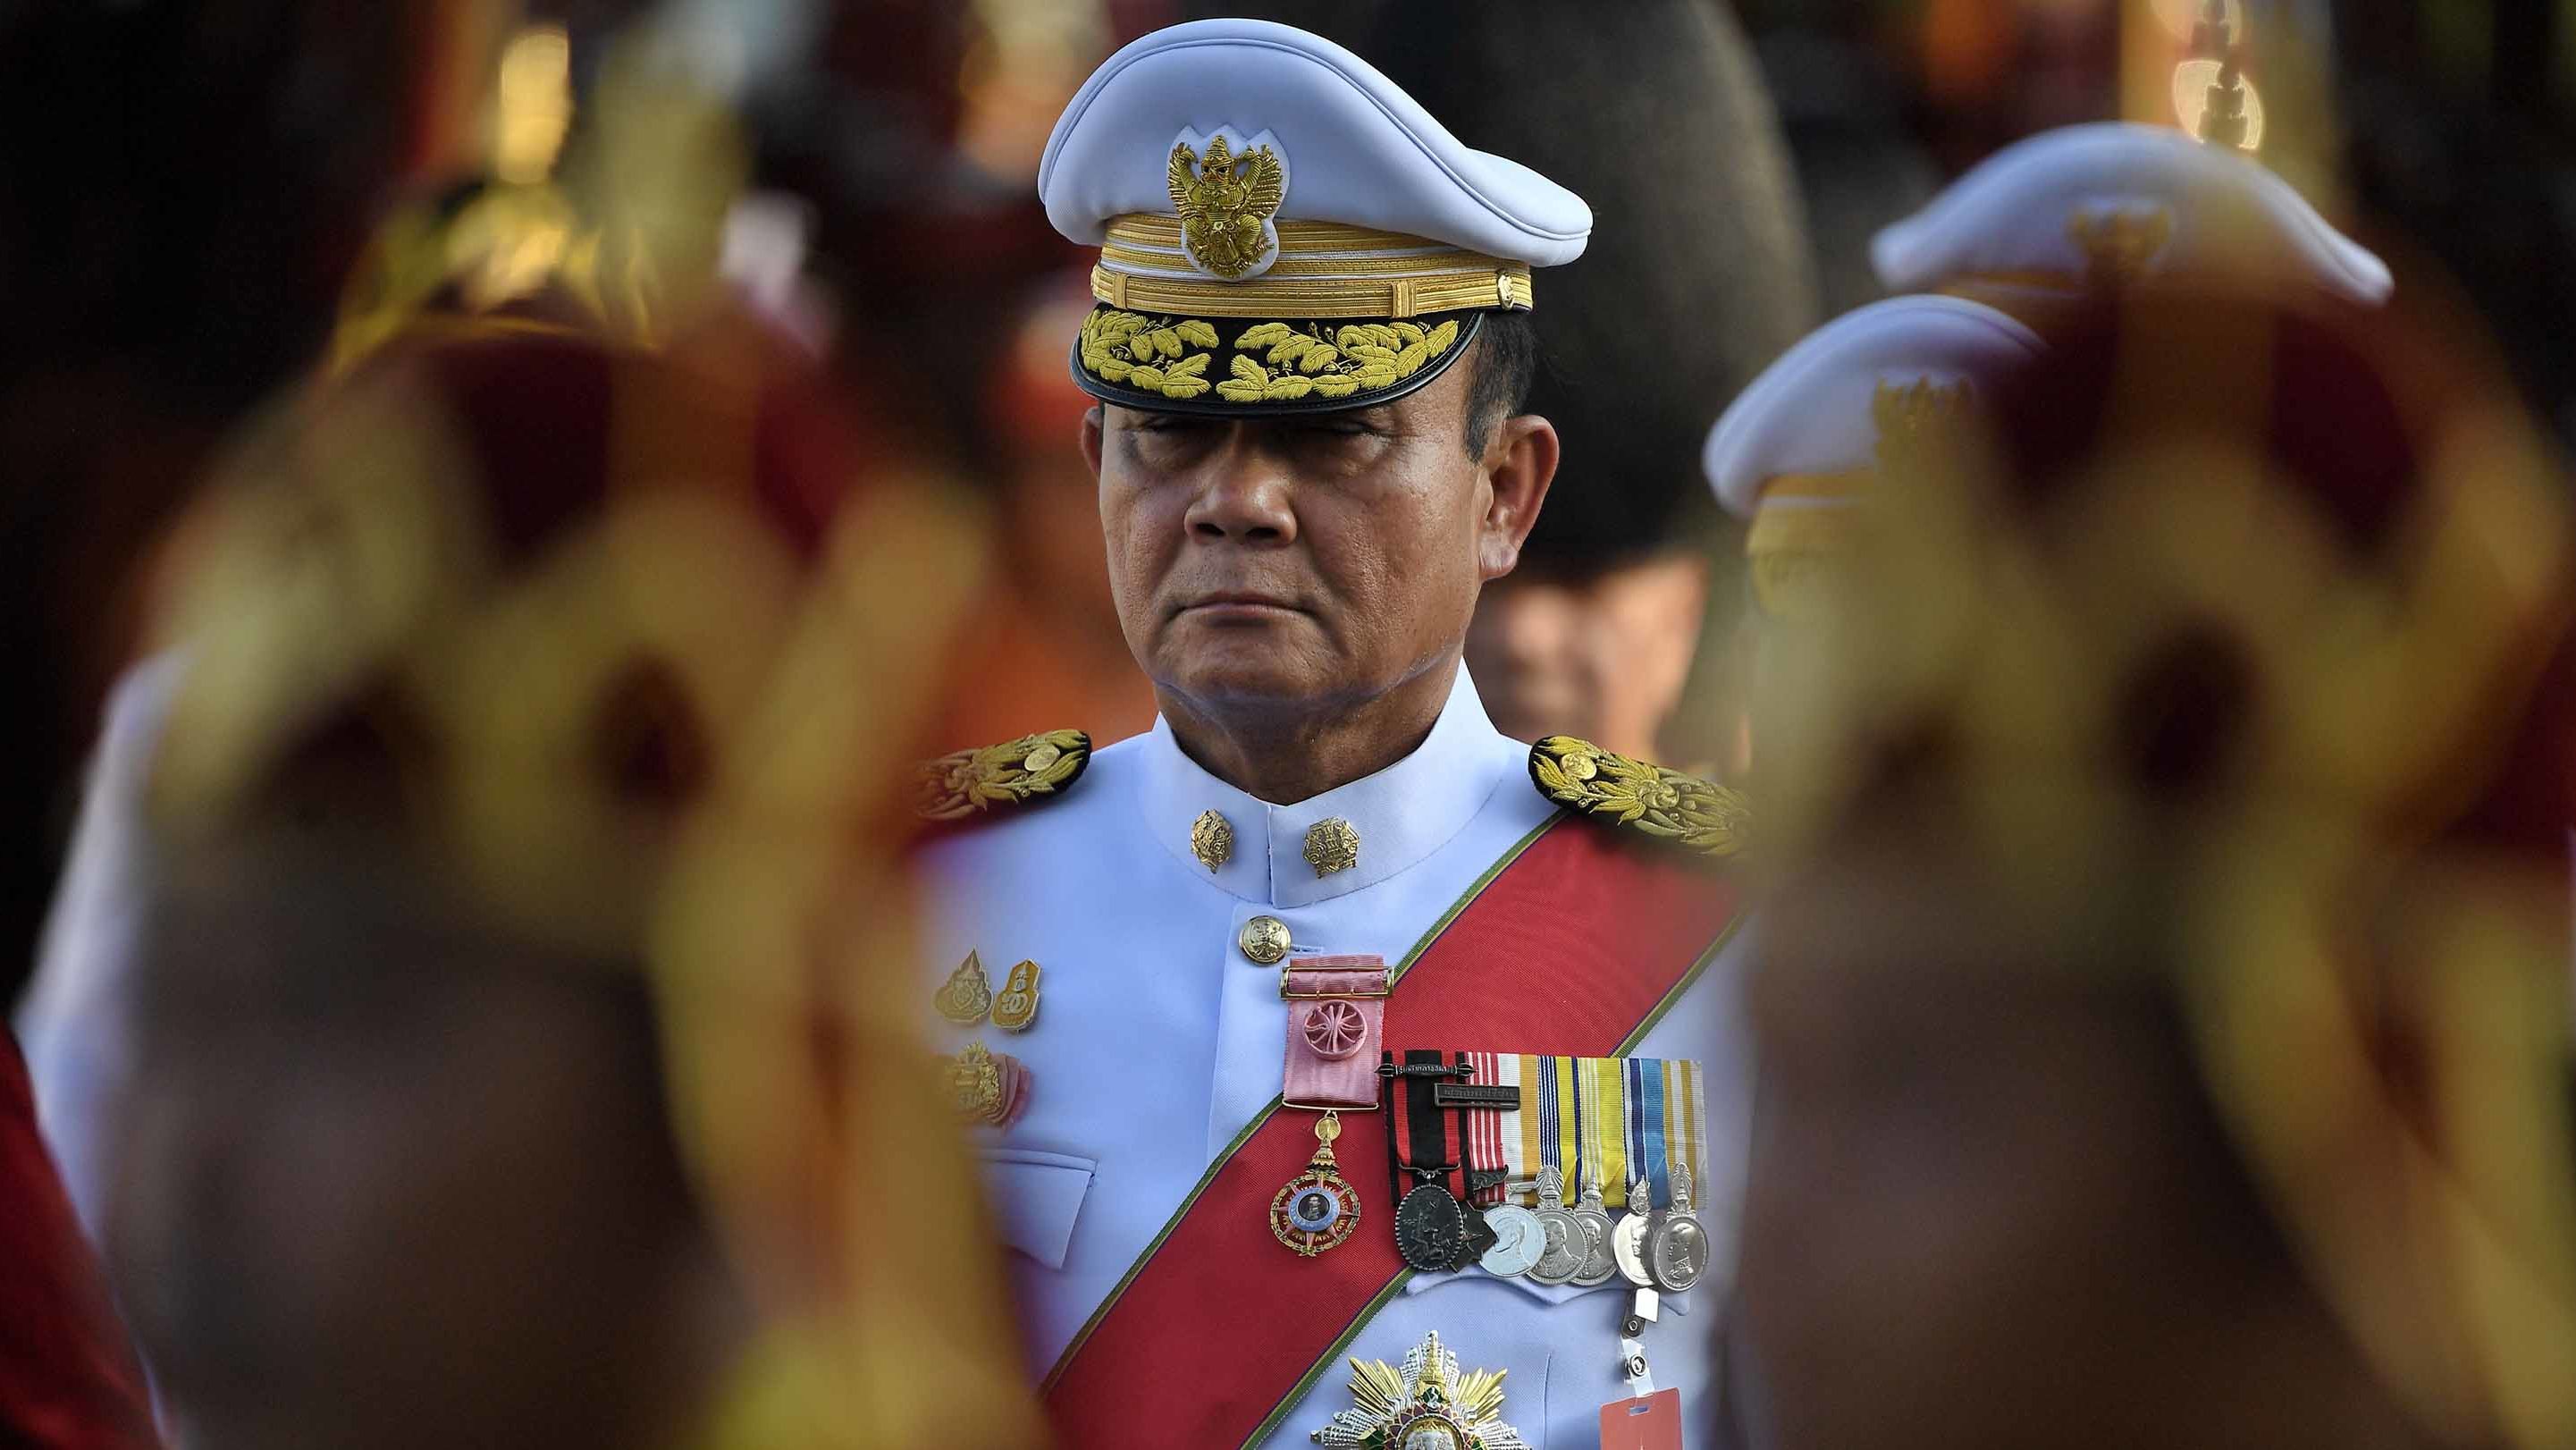 Thailand's Prime Minister Prayut Chan-o-Cha takes part in the coronation procession on May 5.